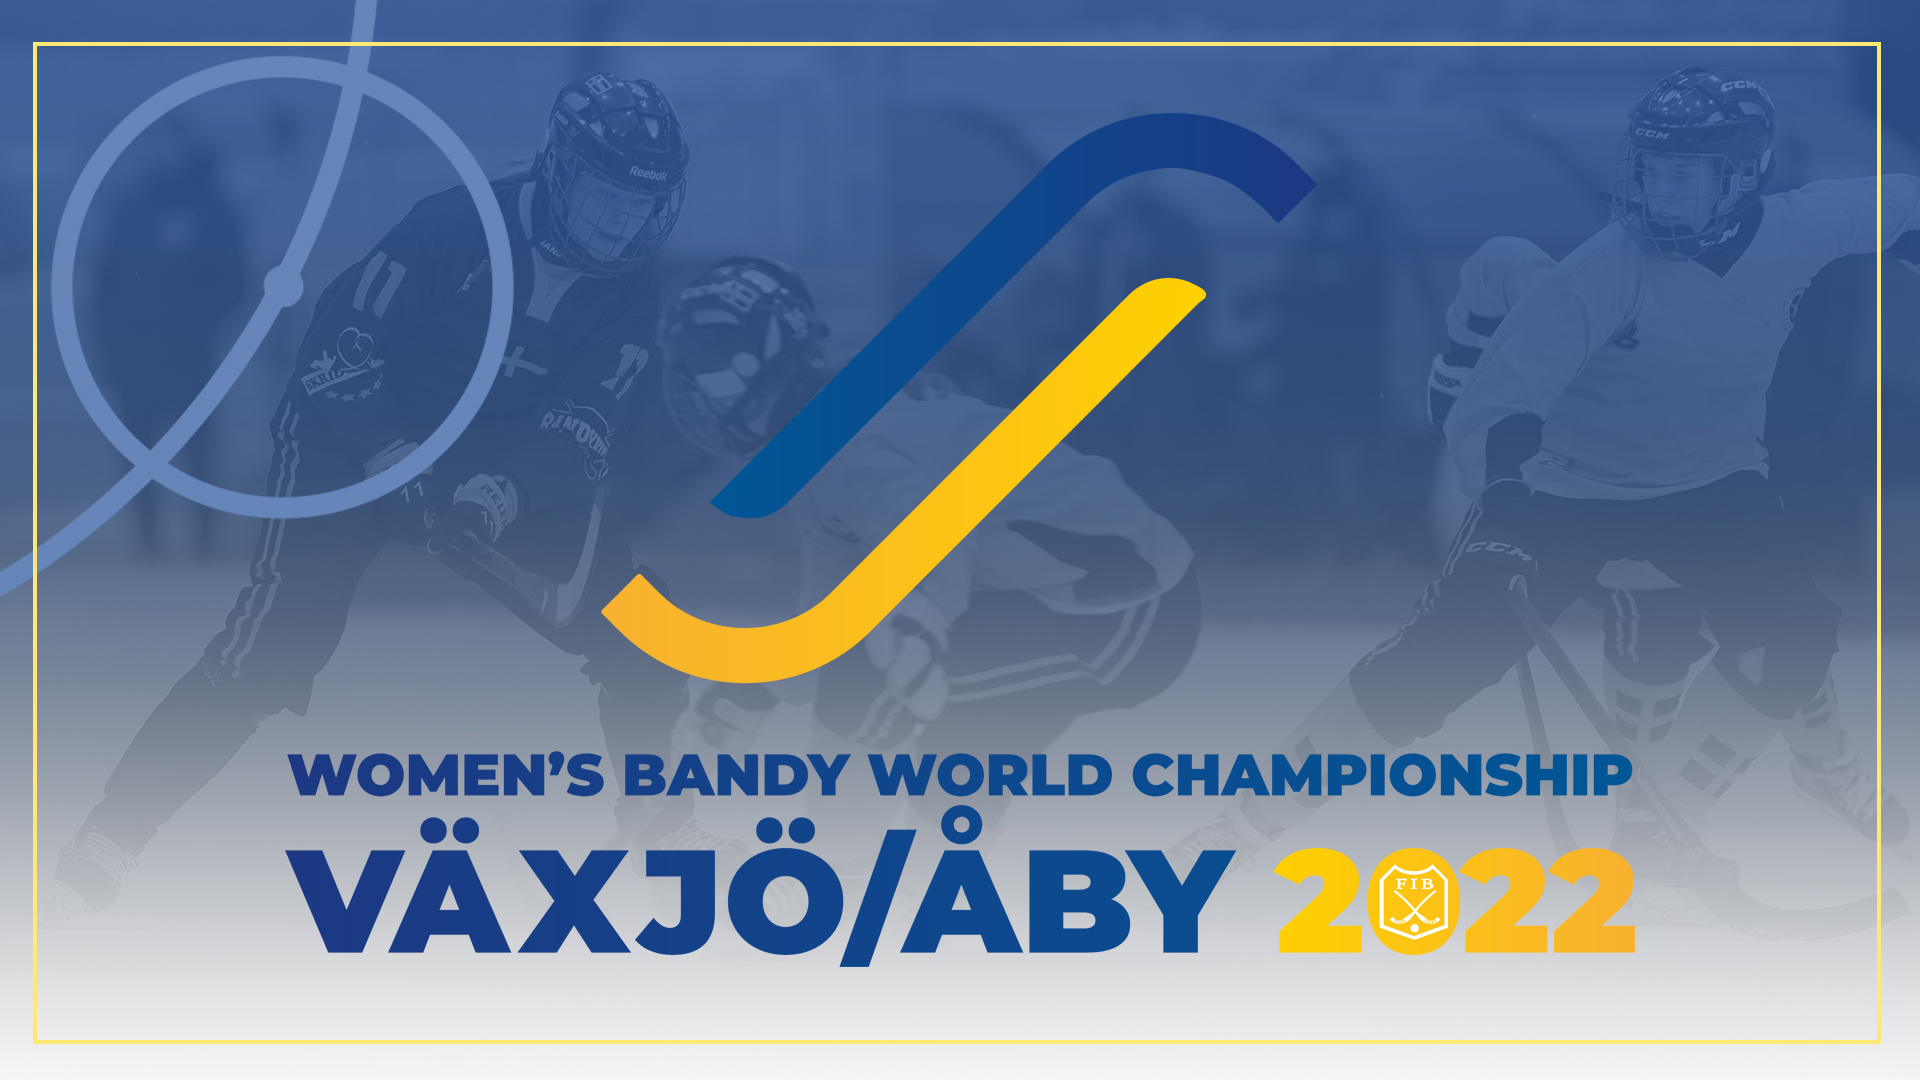 Sweden earns second pool phase win at Women’s Bandy World Championship